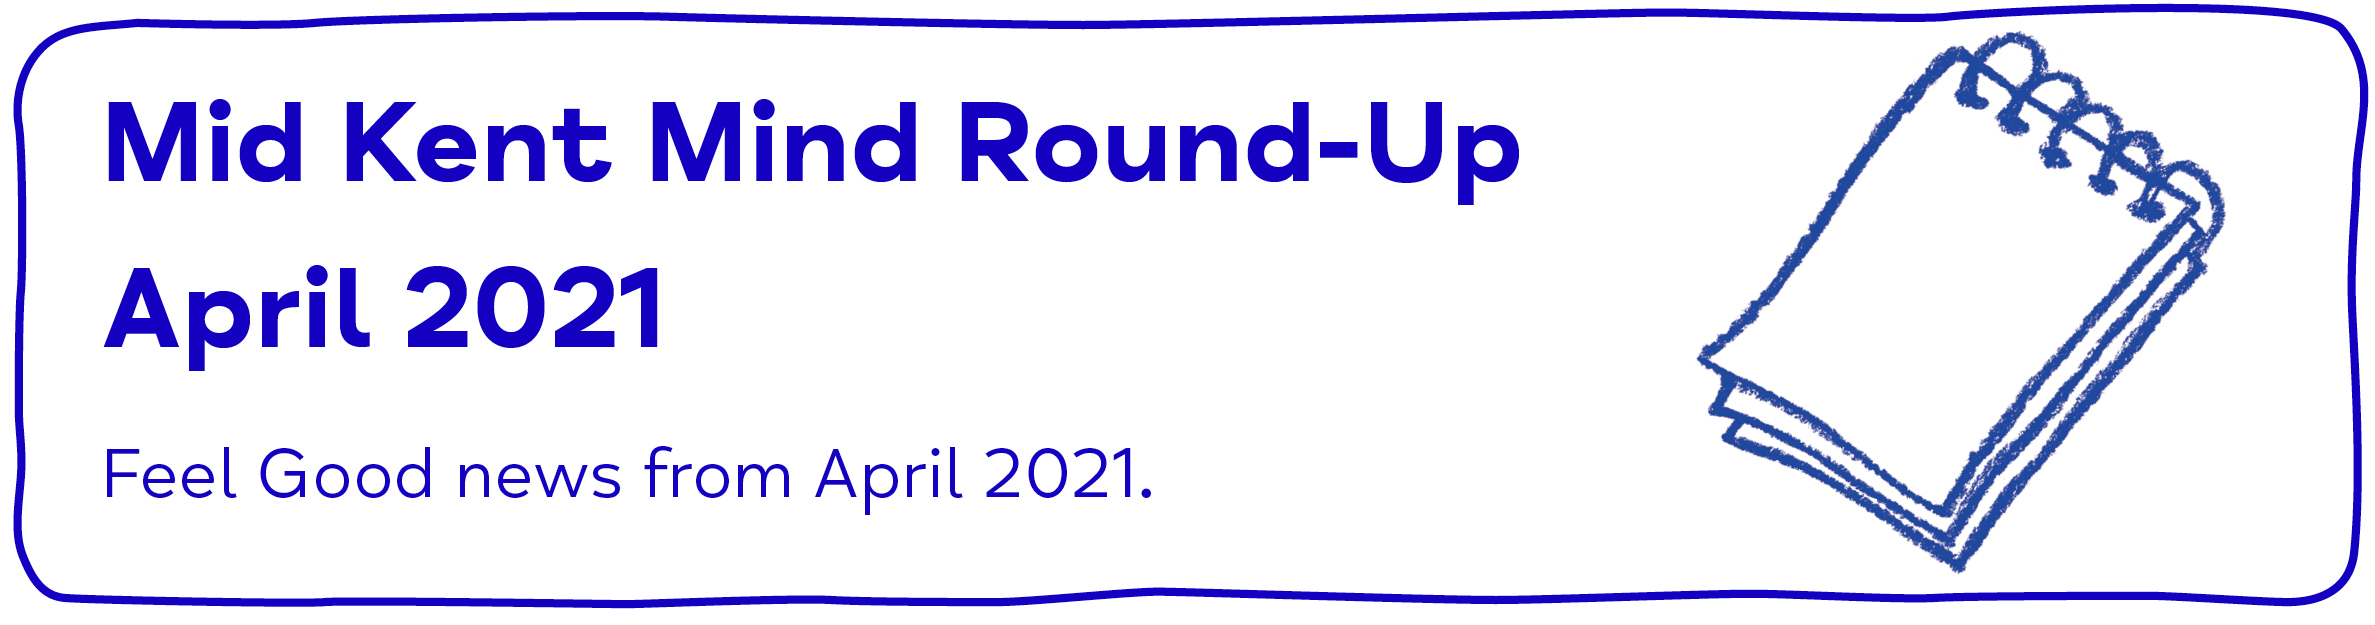 Mid Kent Mind Newsletter - April 2021 - Mid Kent Mind Round-Up. March 2021. Feel-Good news from April 2021.